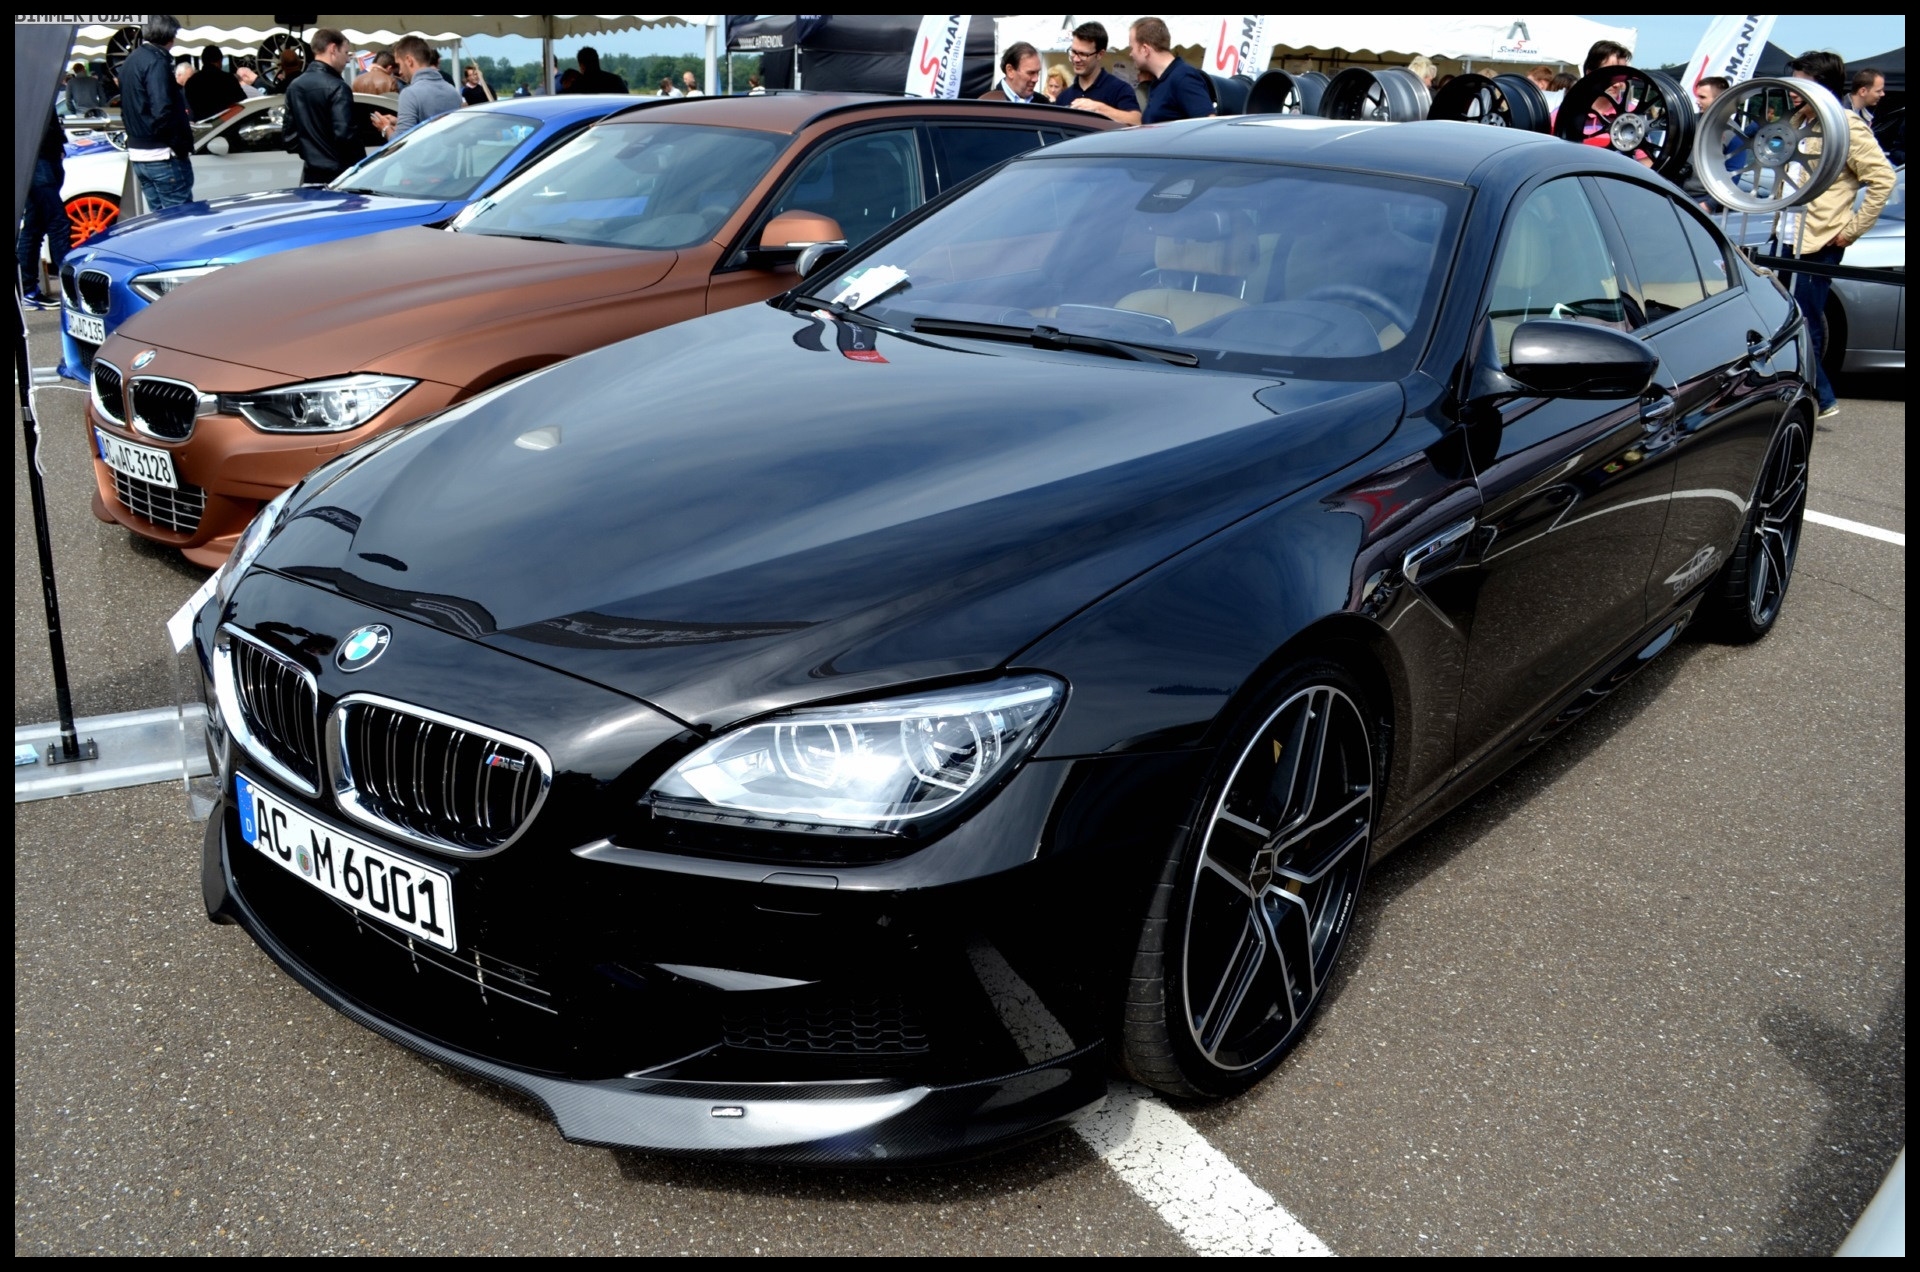 2015 Bmw M6 Gran Coupe for Sale Lovely Hot News 2017 Bmw M6 Msrp 2015 Bmw